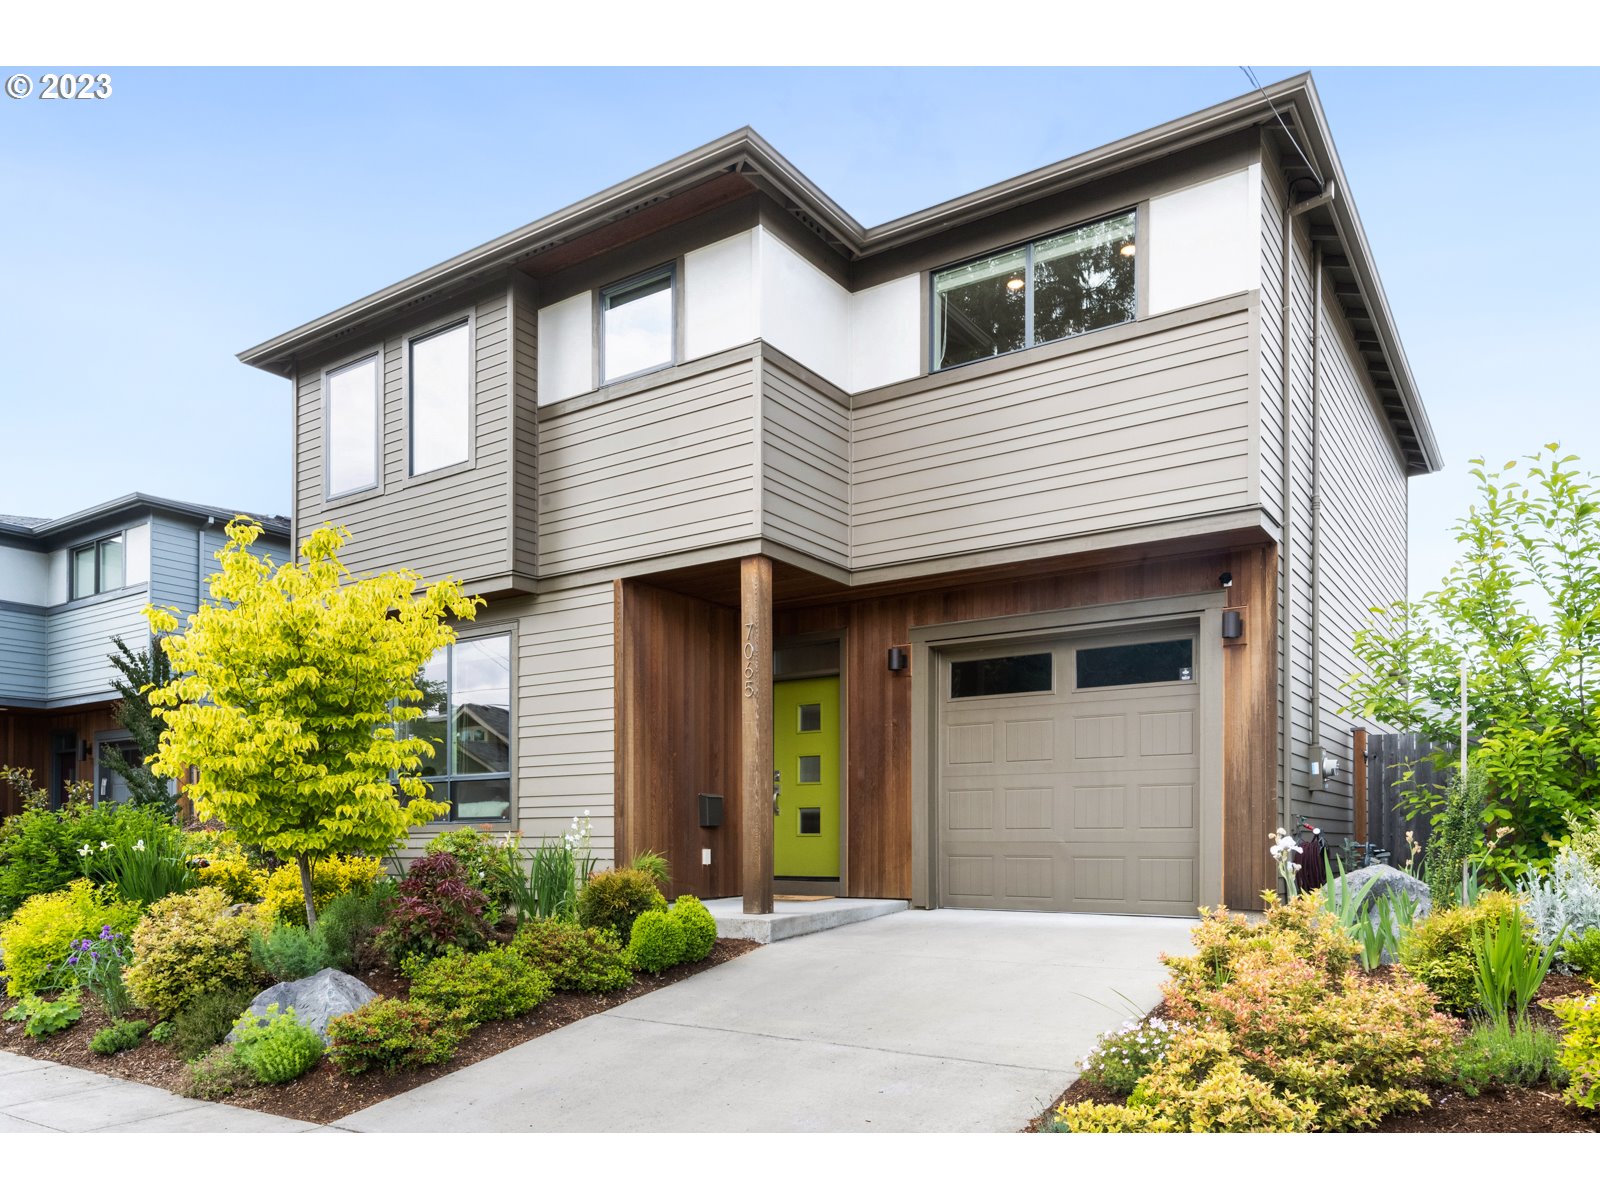 Incredible like-new modern home in fabulous NE PDX! Impeccably maintained, this LEED-certified Renaissance home is filled with high-end finishes and energy-efficient upgrades! It features a wide open floorplan with three bedrooms, 2 1/2 baths, an owners' suite plus a chef's kitchen with quartz and stainless! Built with care, it boasts a 10 Energy Score with mini-splits for energy-efficient heating & cooling, on-demand hot water, an attached garage for your toys, and a sweet private patio with zen gardens for summer evenings. Nestled in lovely landscaping and located on a quiet/peaceful street, this home truly has it all! There's nothing to do but move in and enjoy all the fun in Montavilla! [Home Energy Score = 10. HES Report at https://rpt.greenbuildingregistry.com/hes/OR10177518]